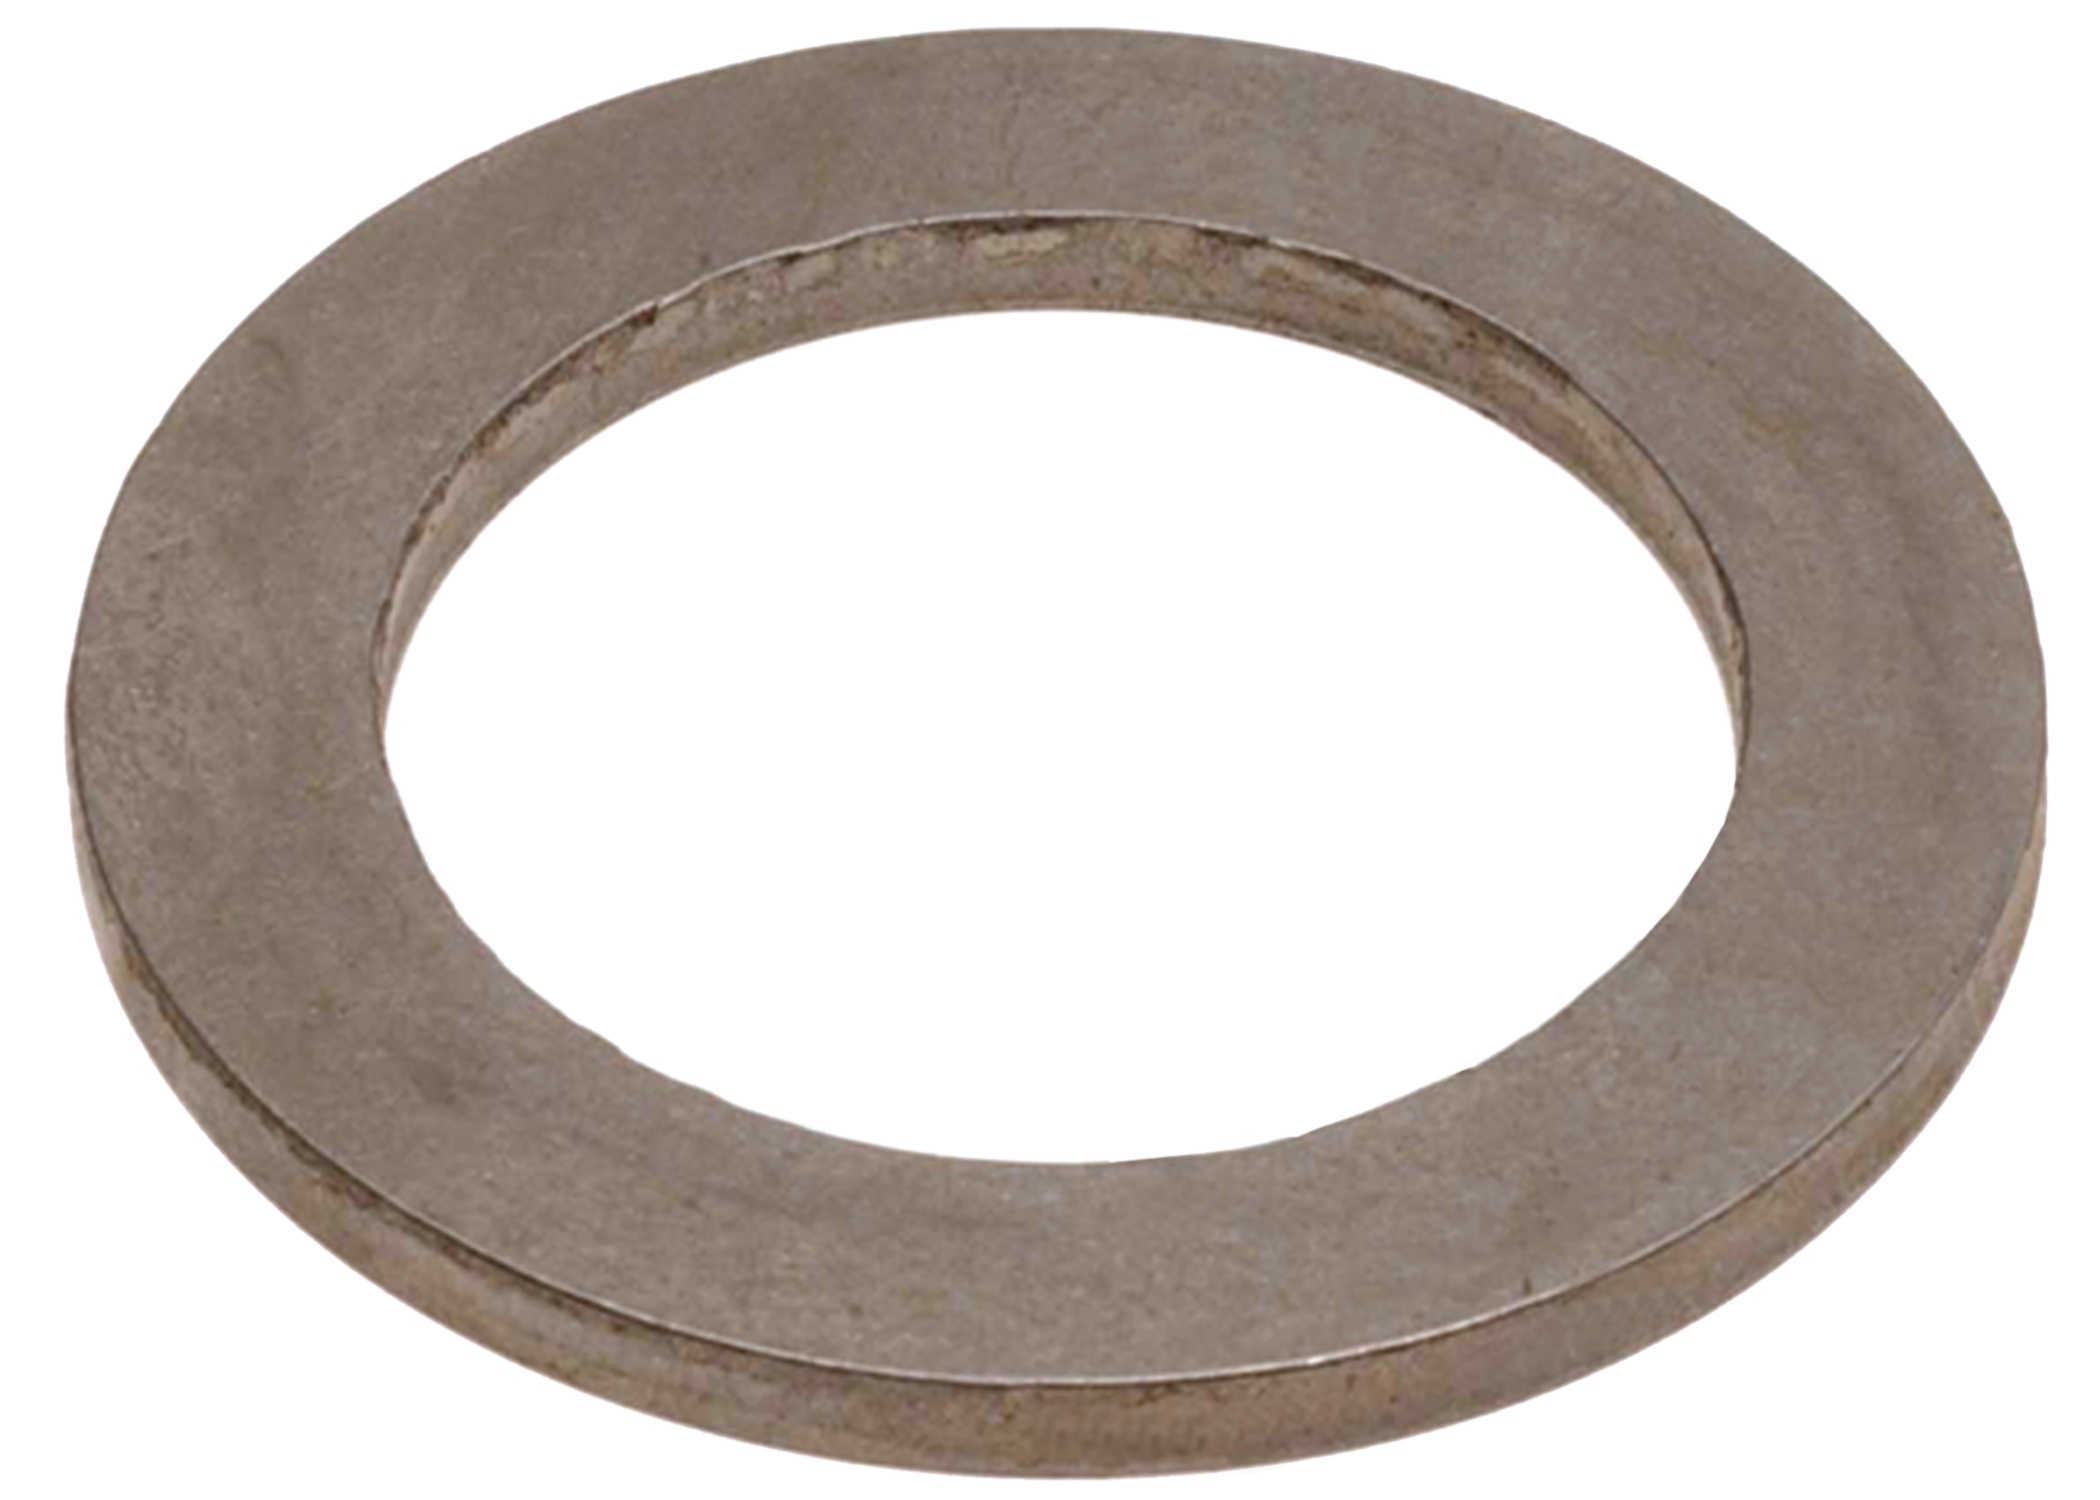 GM GENUINE PARTS - Automatic Transmission Input Clutch Thrust Washer (Reverse) - GMP 8642074